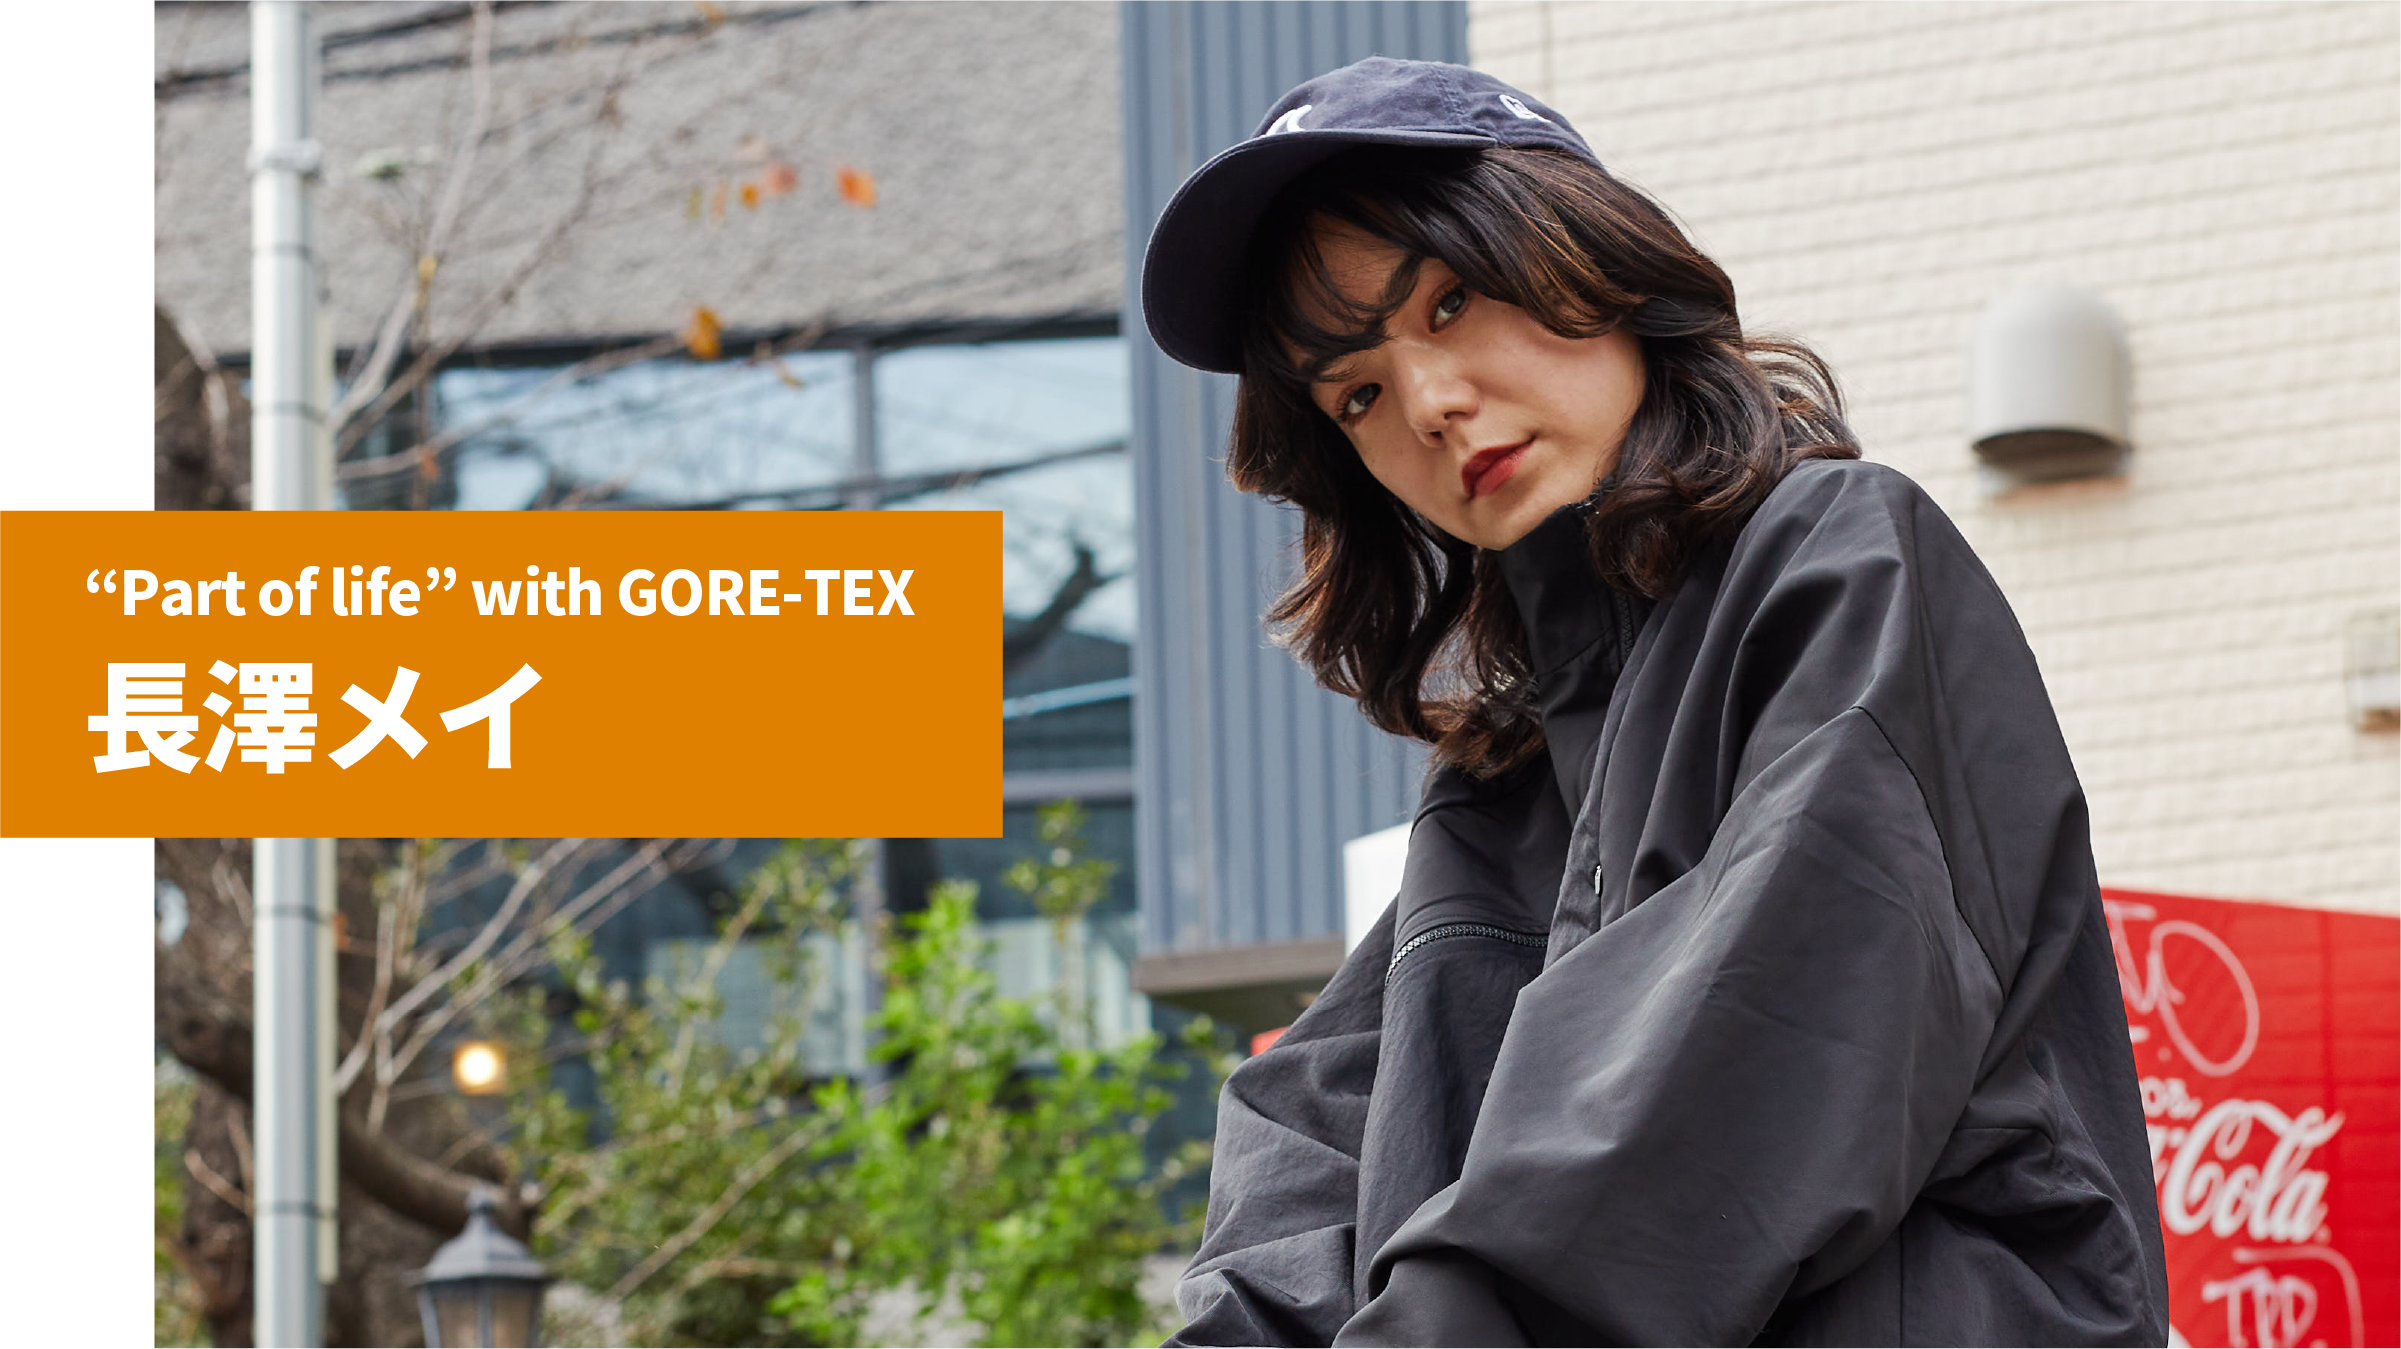 "“Part of life” with GORE-TEX INTERVIEW NAGASAWA"